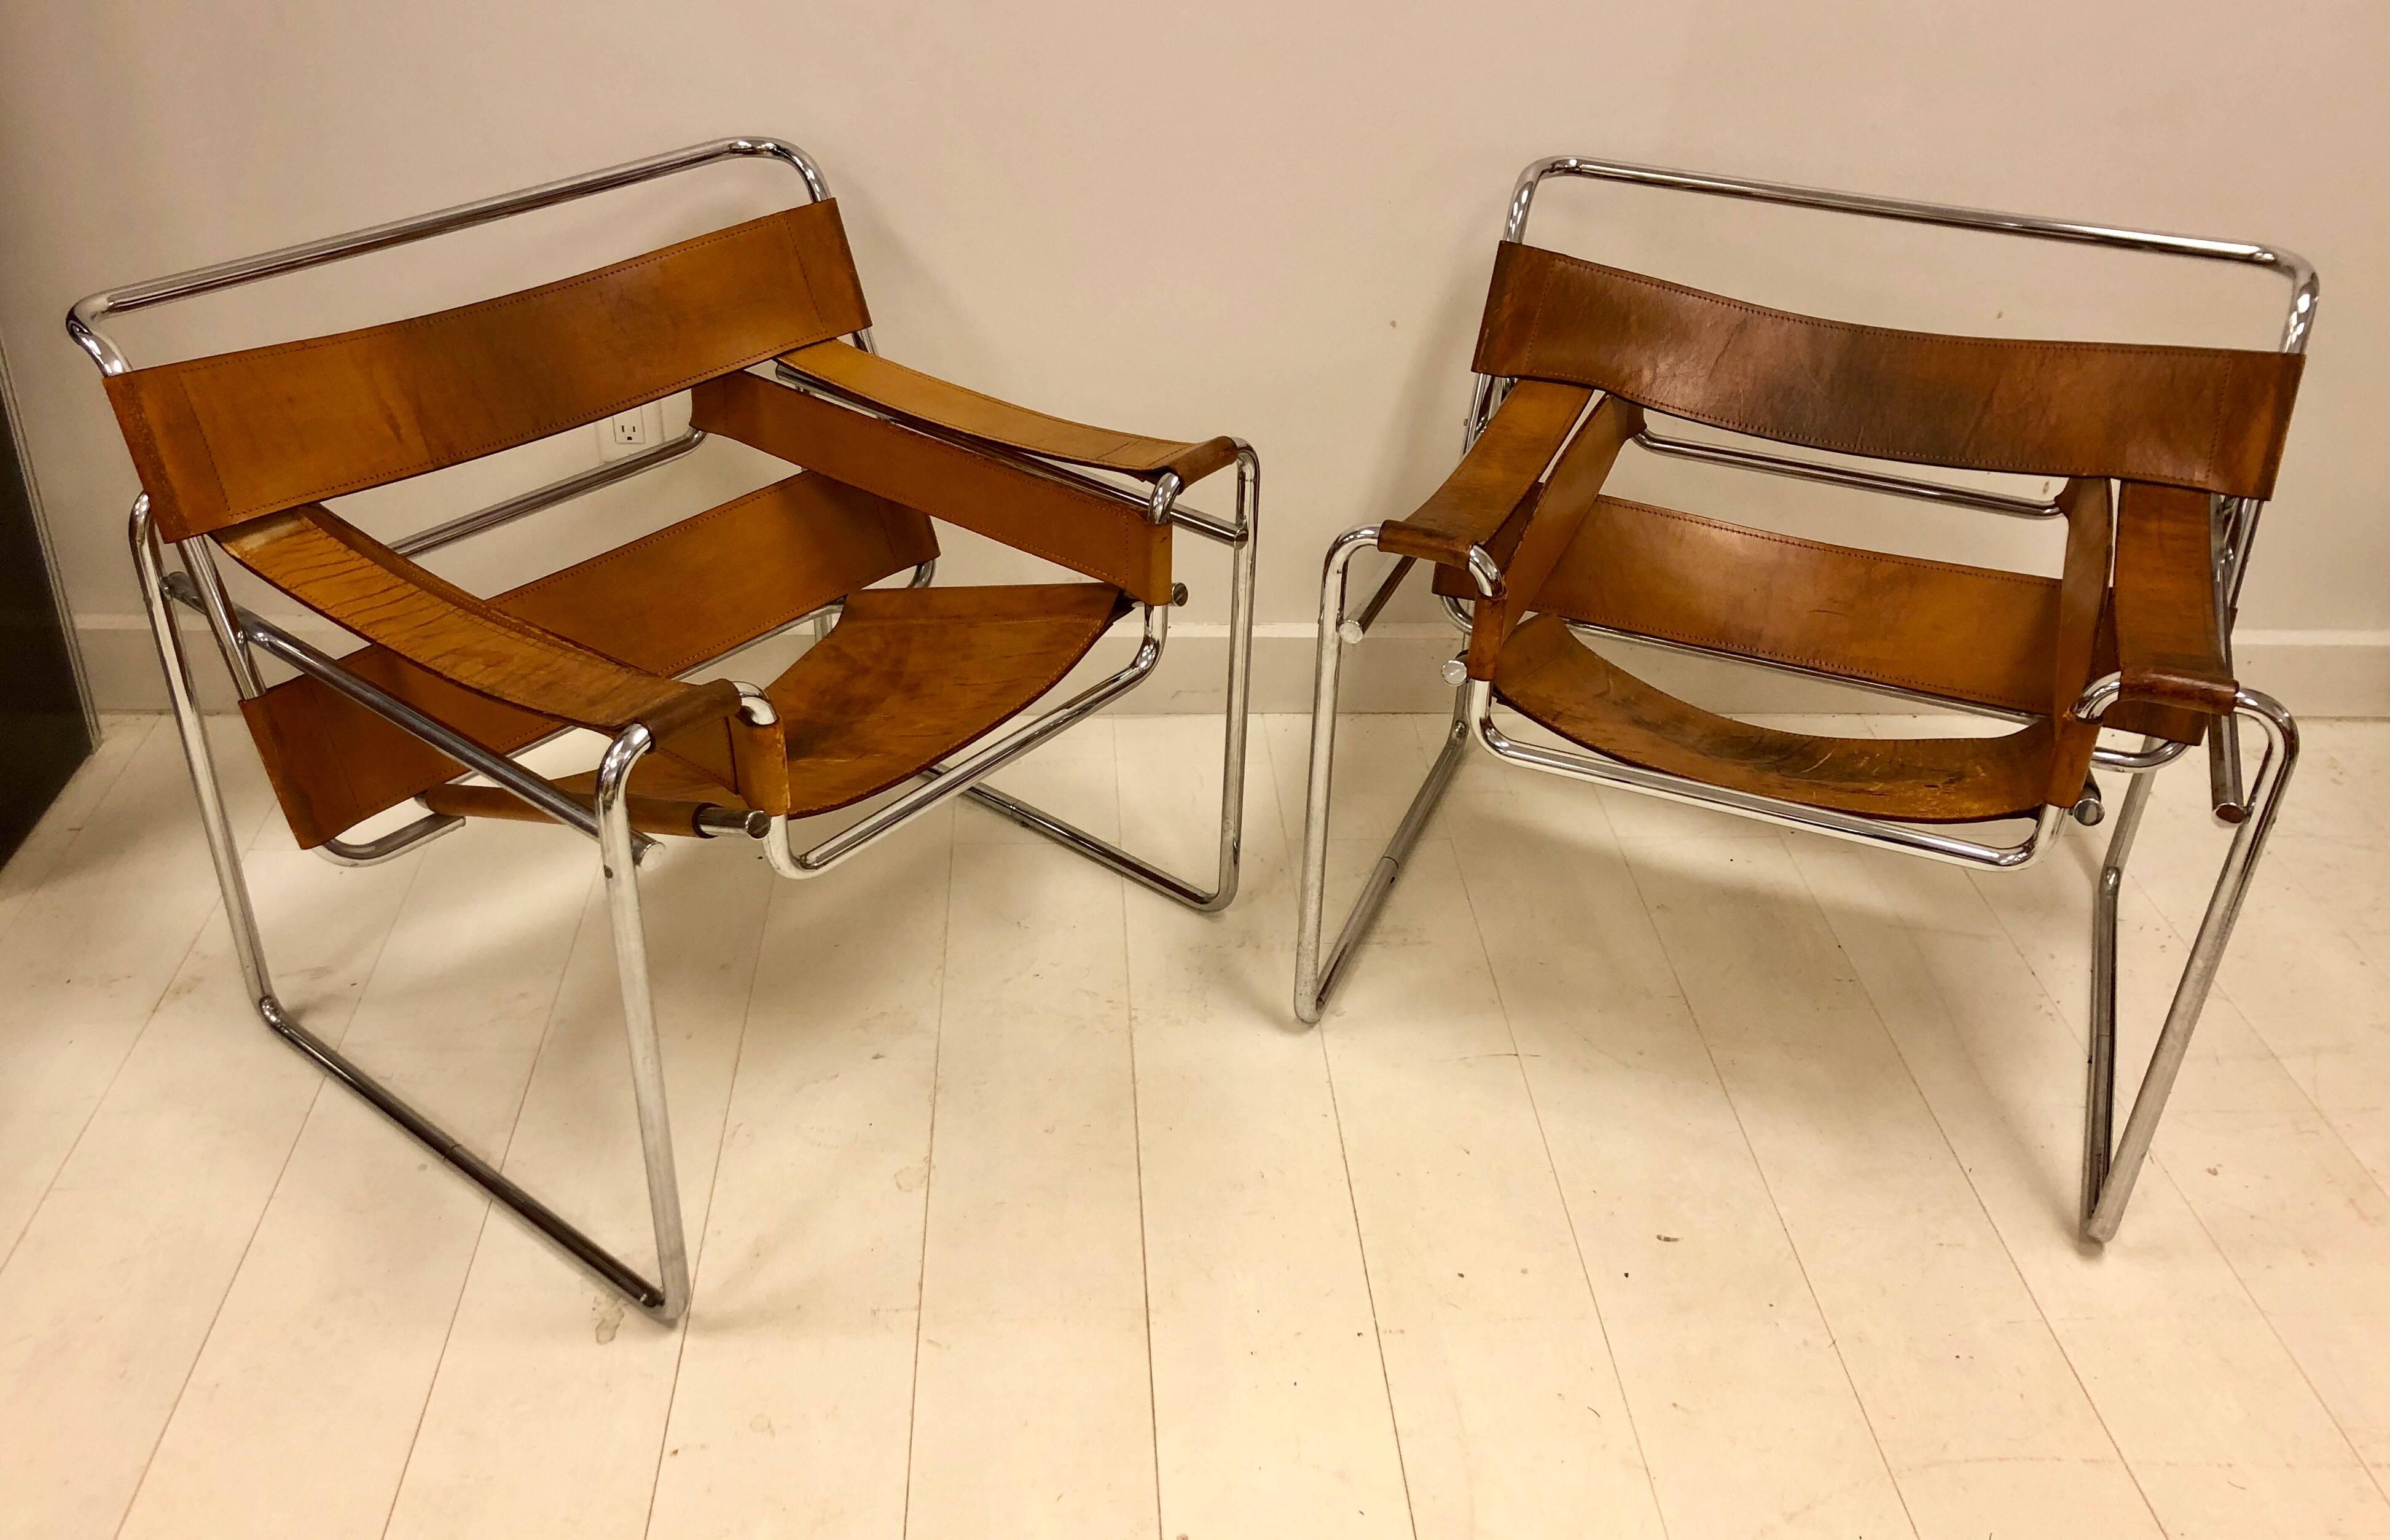 Vintage example of this archetypal Bauhaus design, with soulfully worn-in cognac saddle leather on a chromed steel frame, circa 1960s.